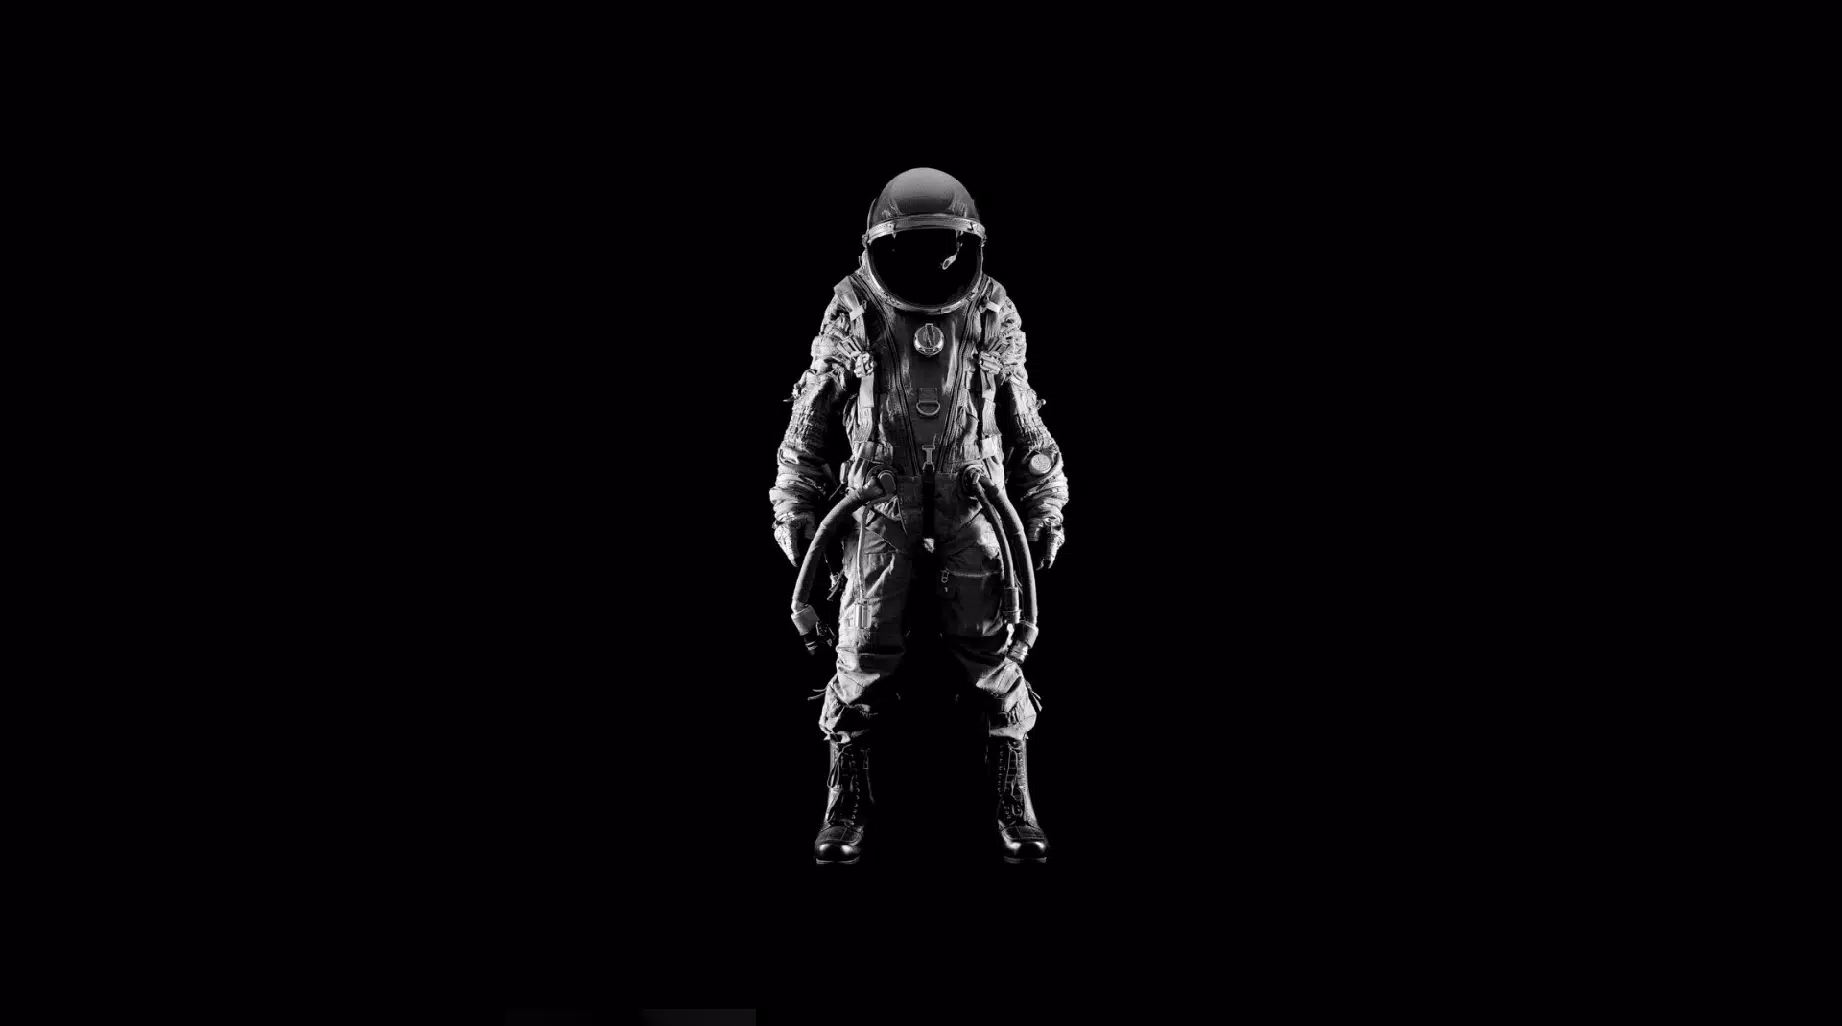 LV Astronaut wallpaper by Mysterios666 - Download on ZEDGE™